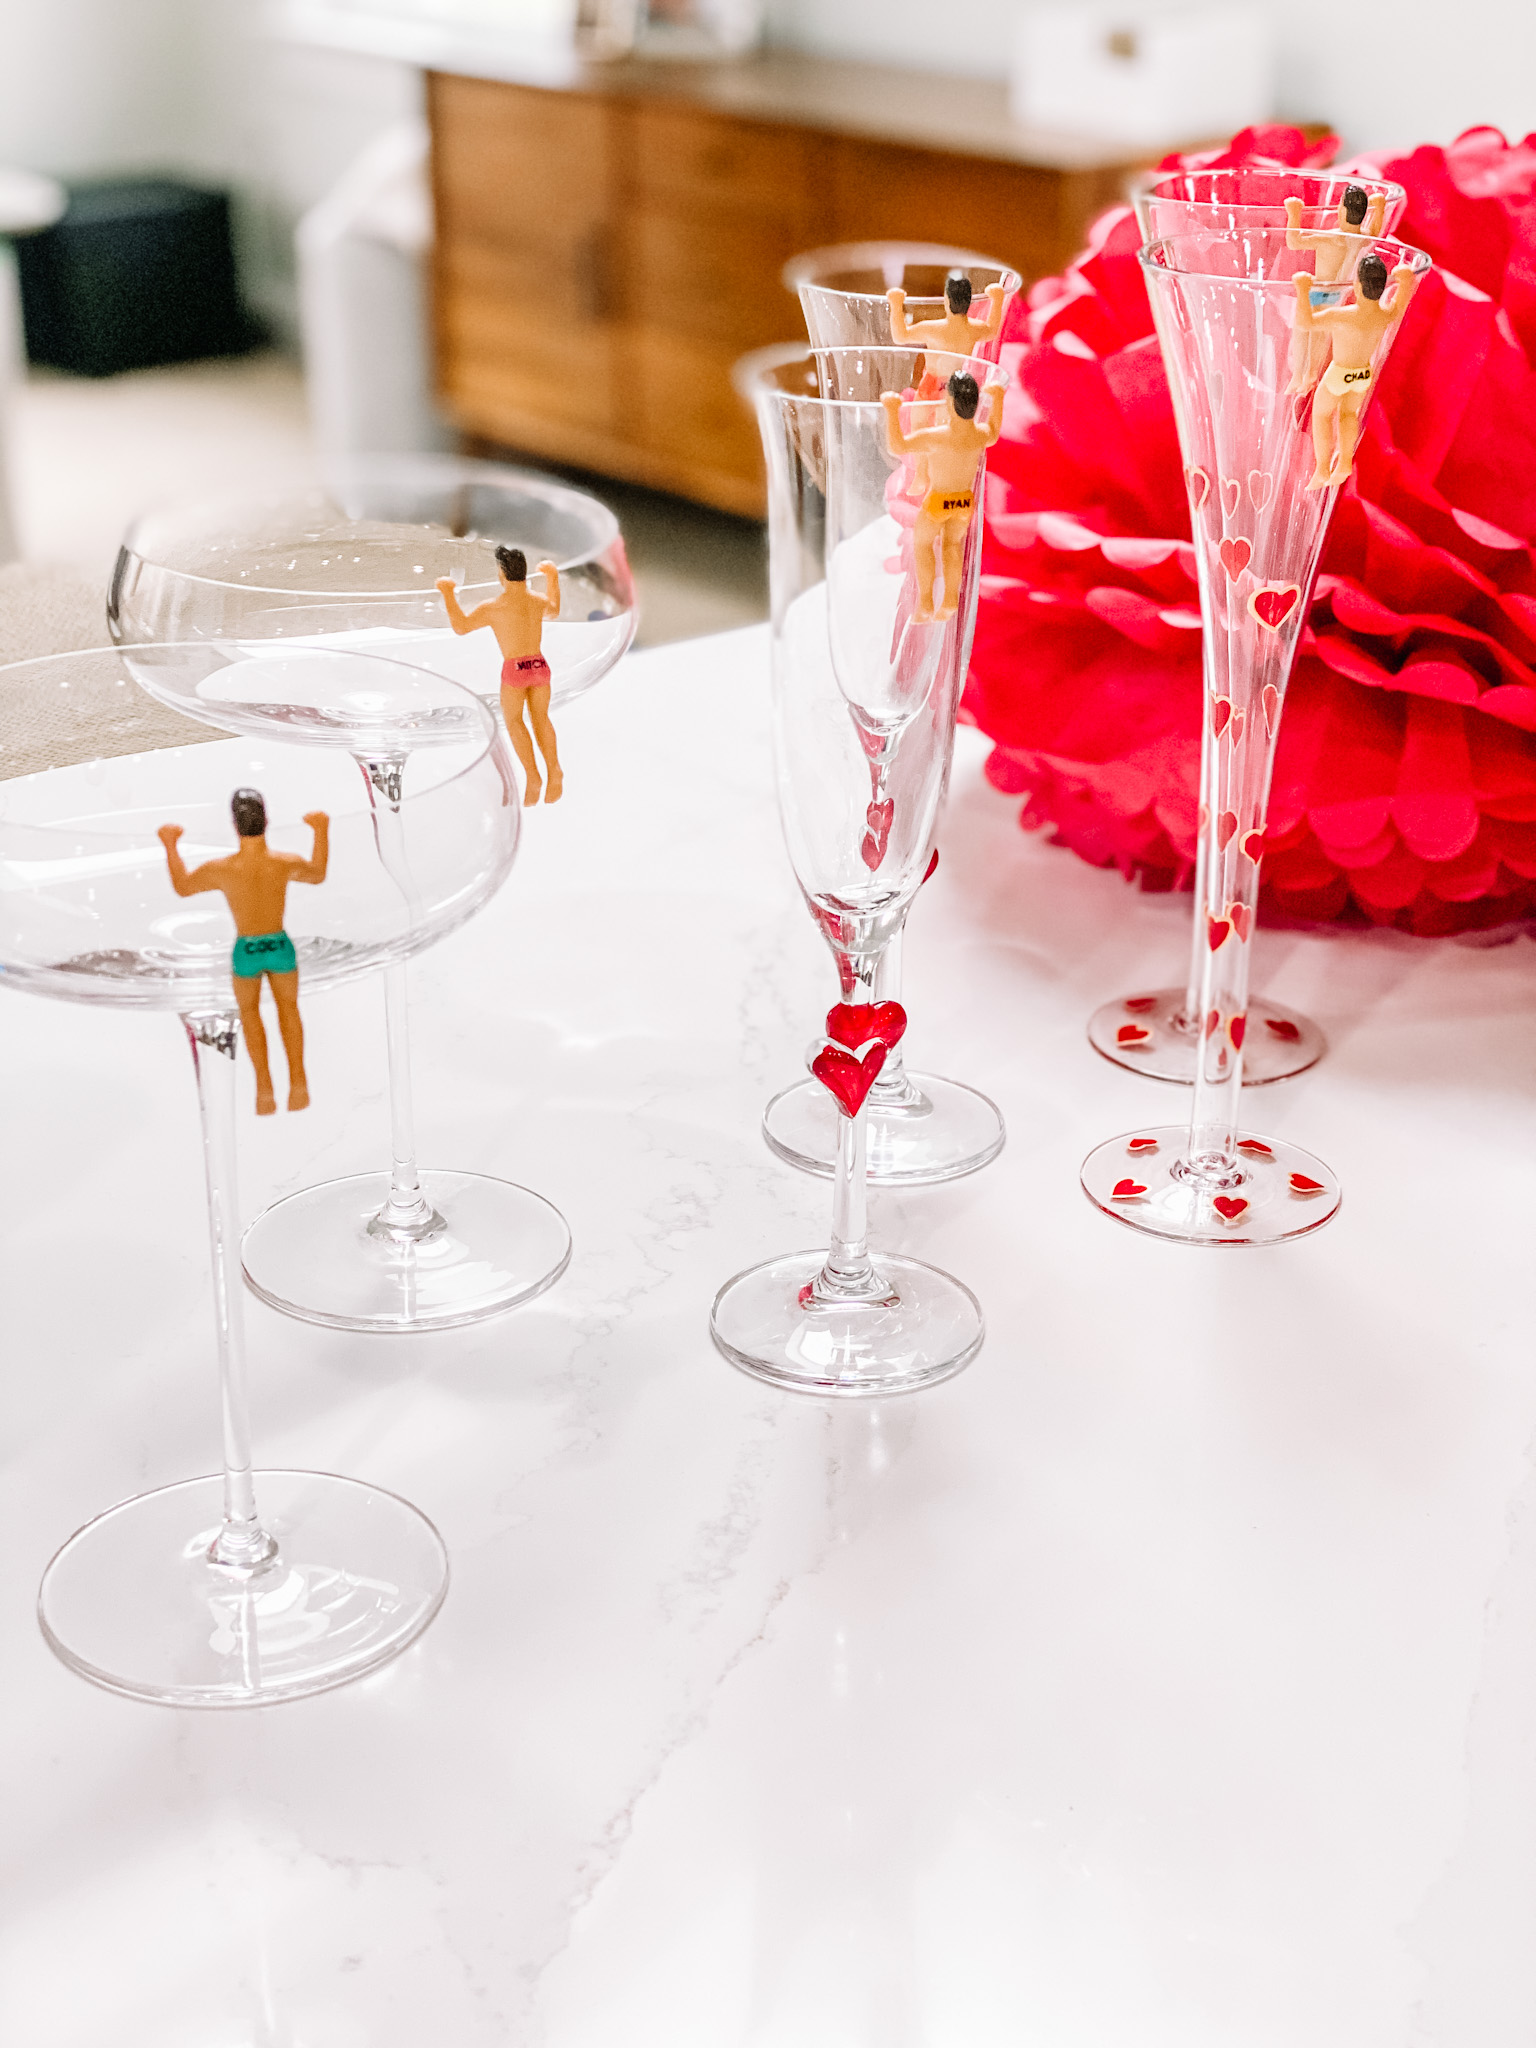 Mark your galentine's day glasses in style with these wine markers.